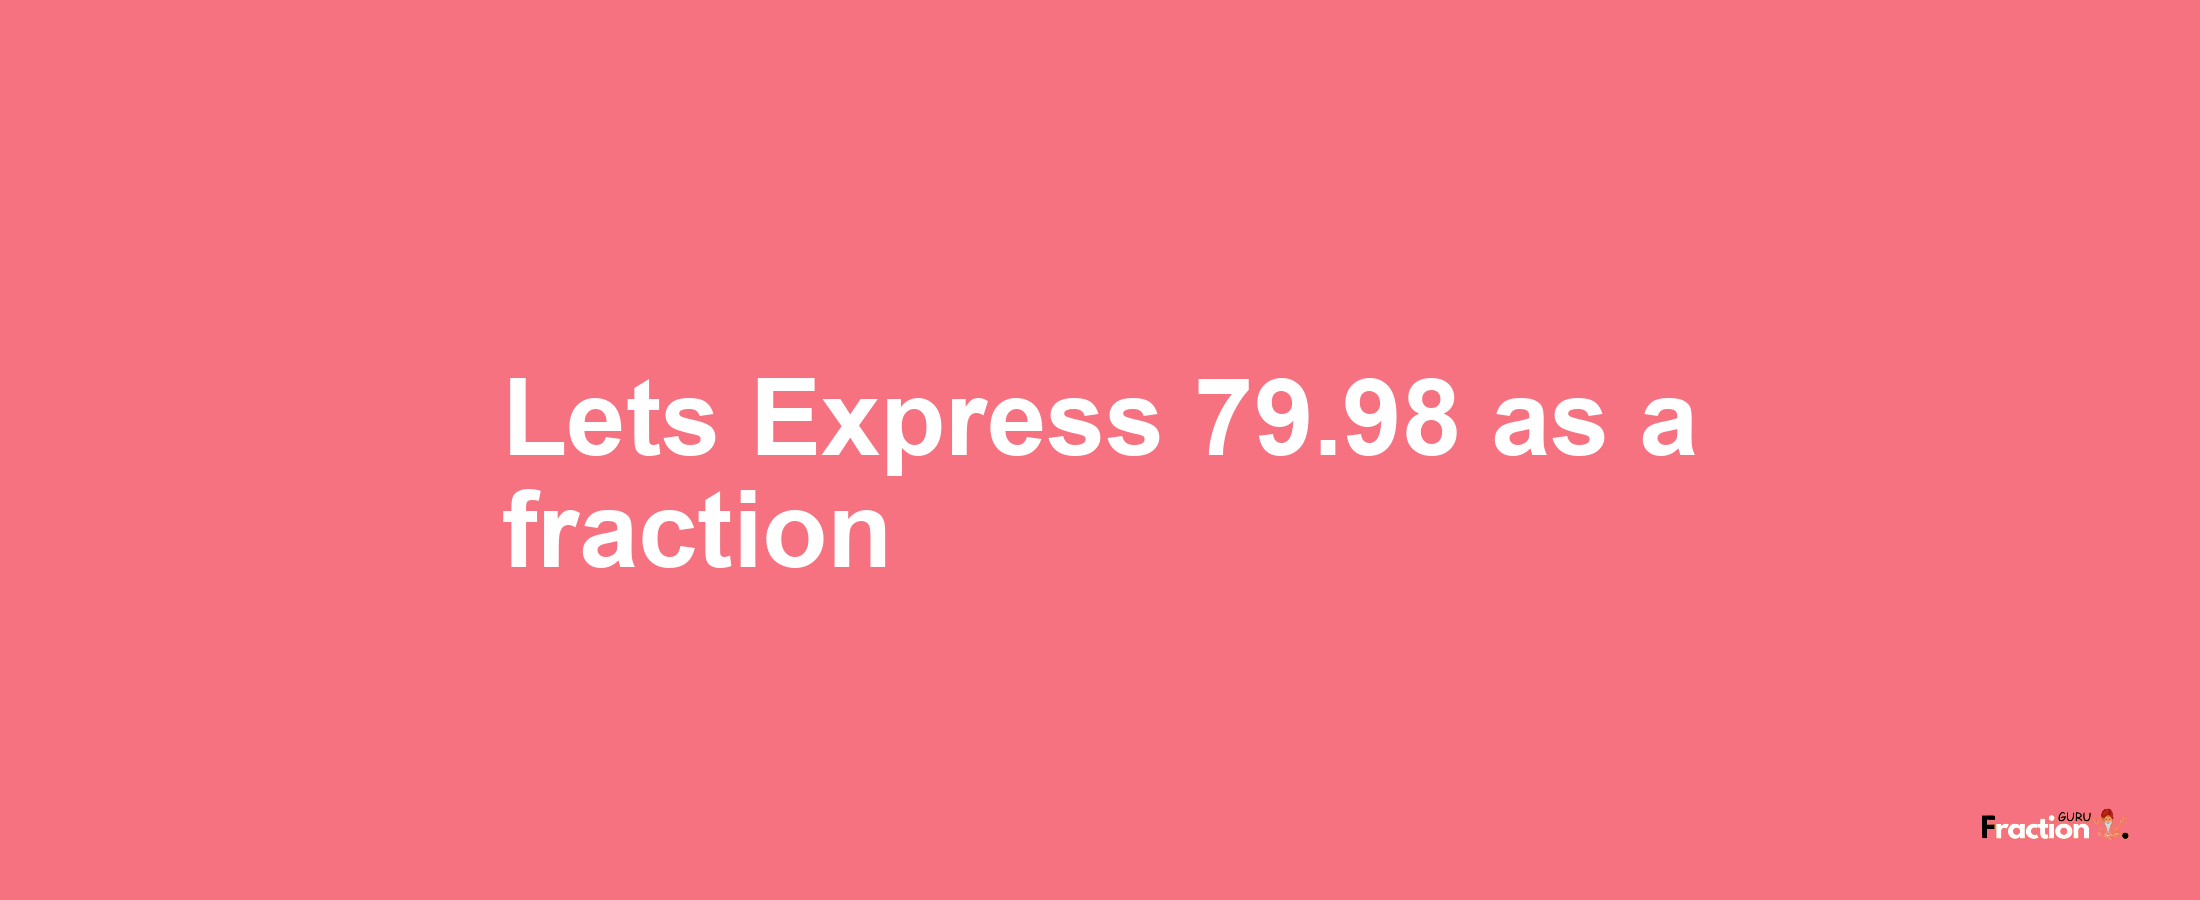 Lets Express 79.98 as afraction